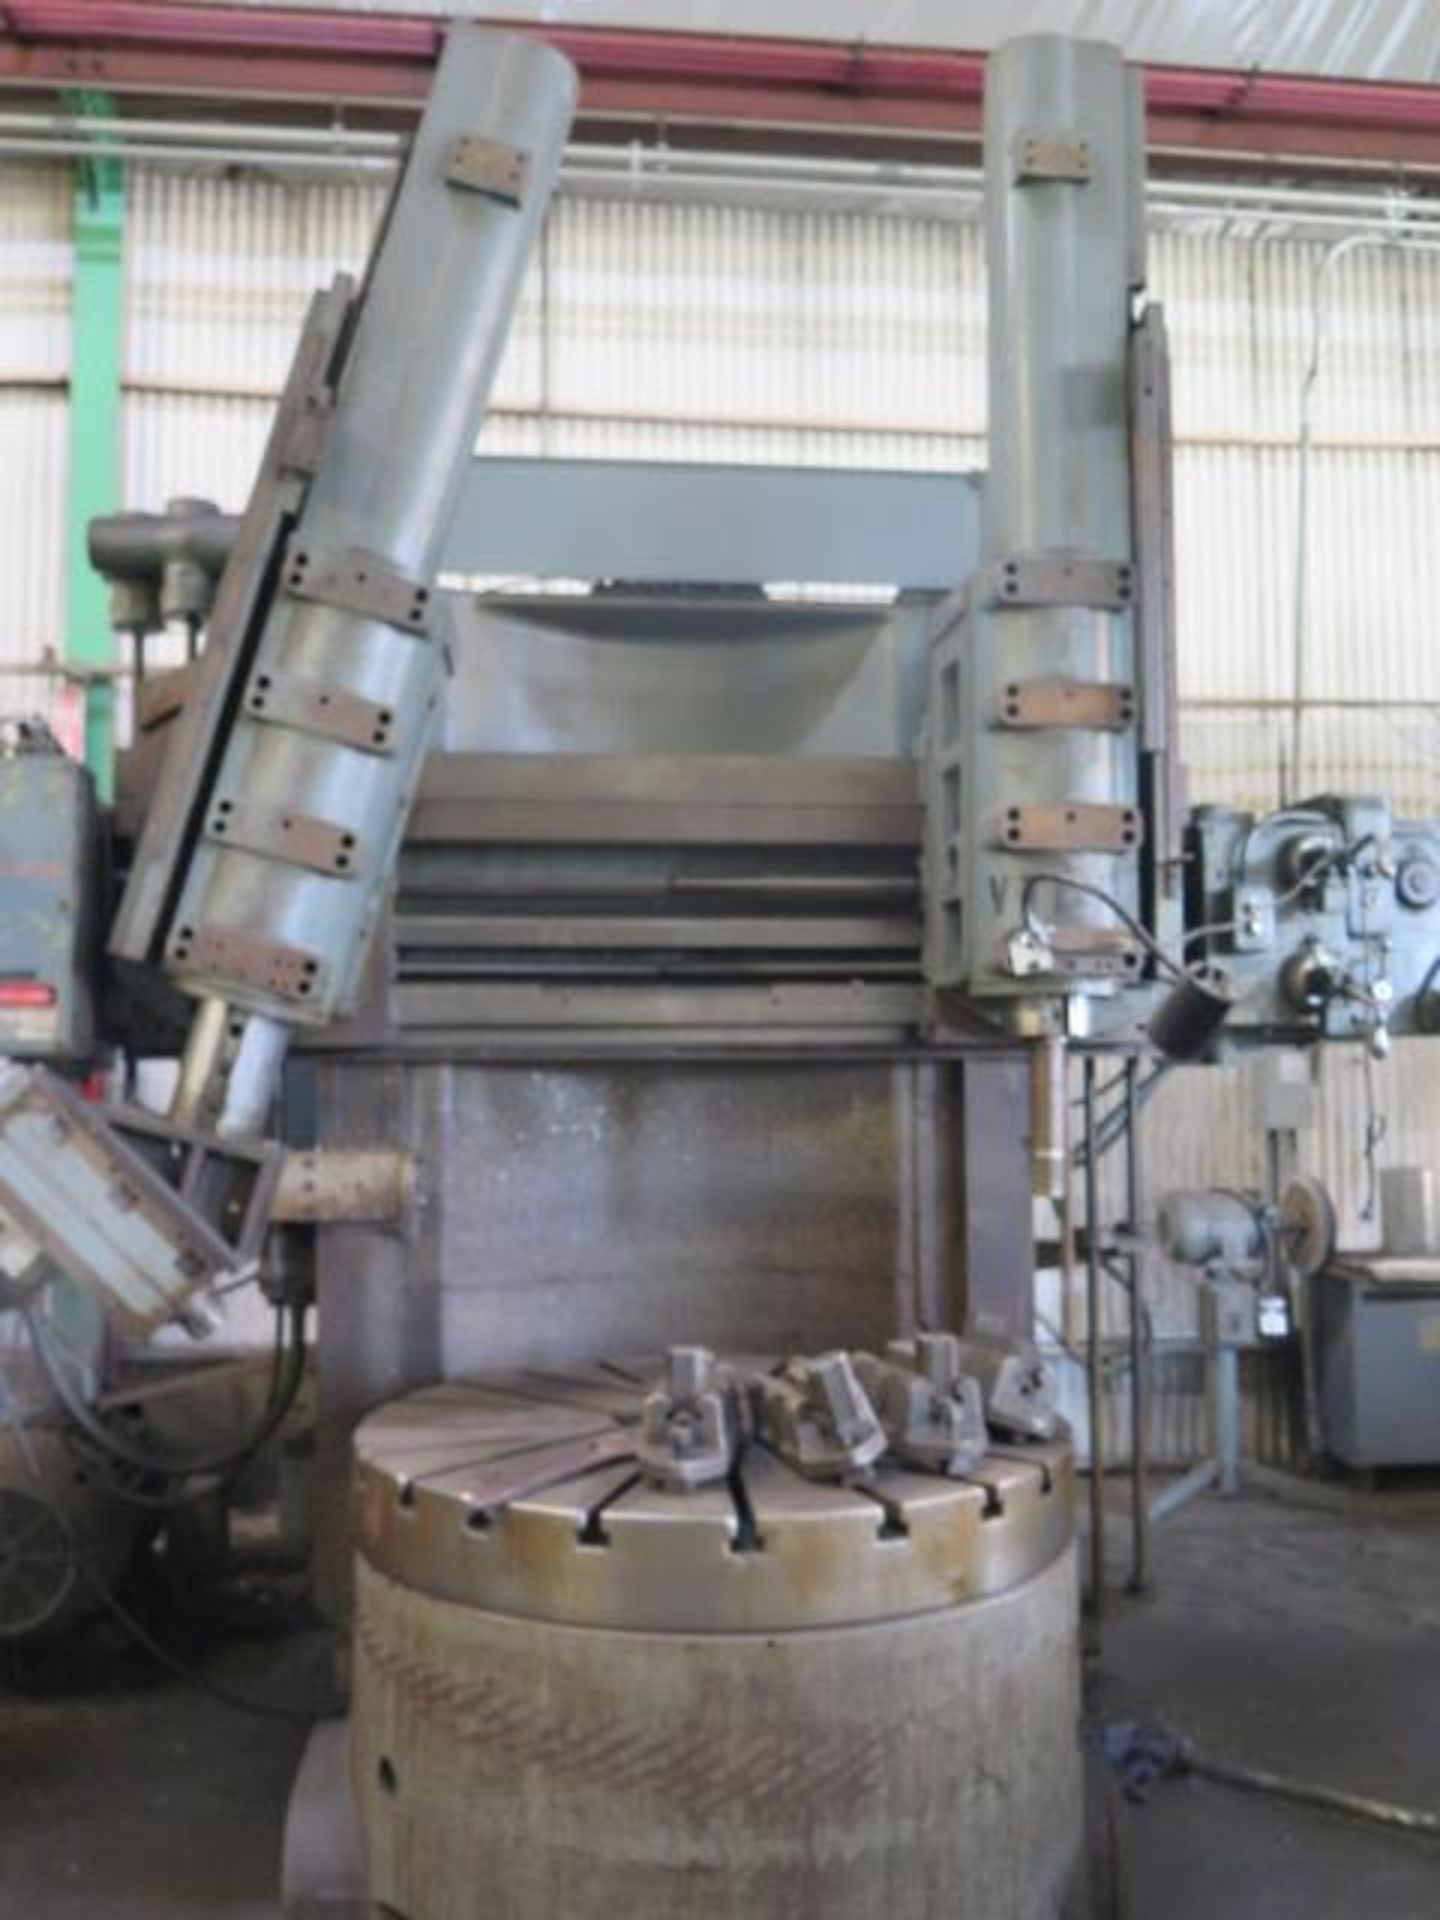 Bullard 54” Vertical Boring Mill w/ 4.3-160 RPM, 63” Swing, Hyd Tracer Head, SOLD AS IS - Image 3 of 17